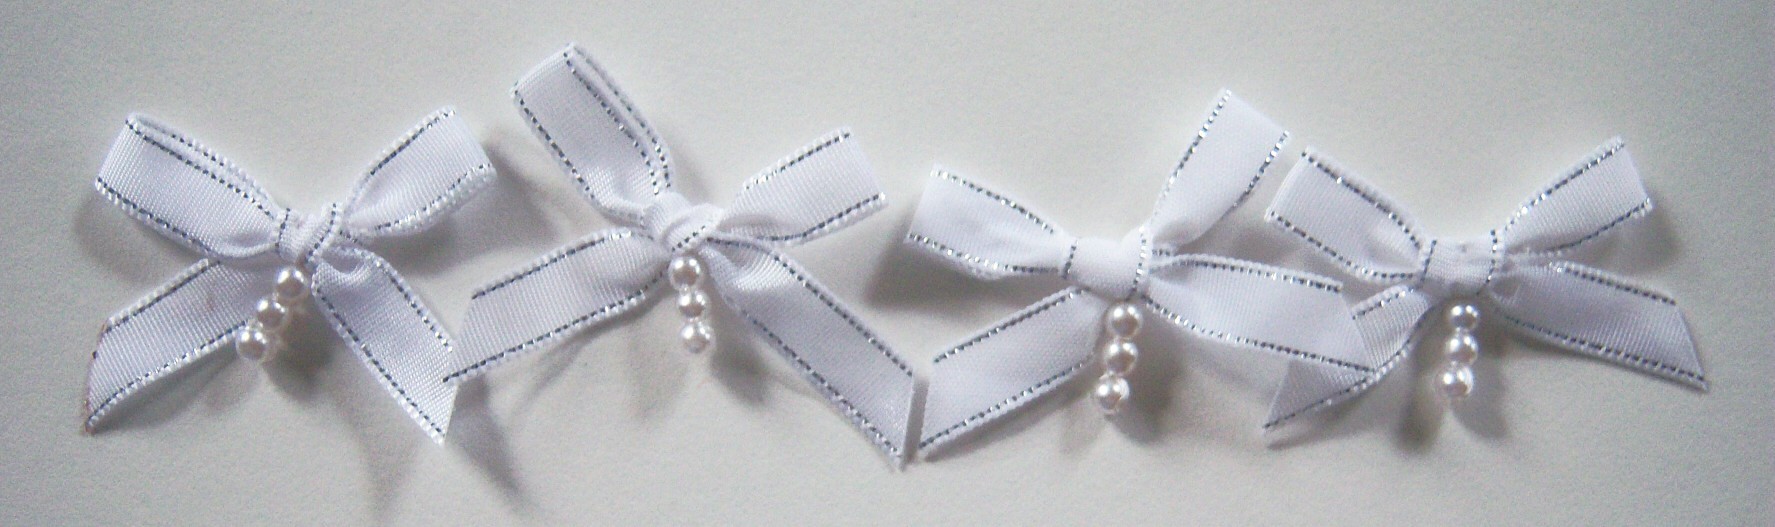 White/Silver/Pearls Bow